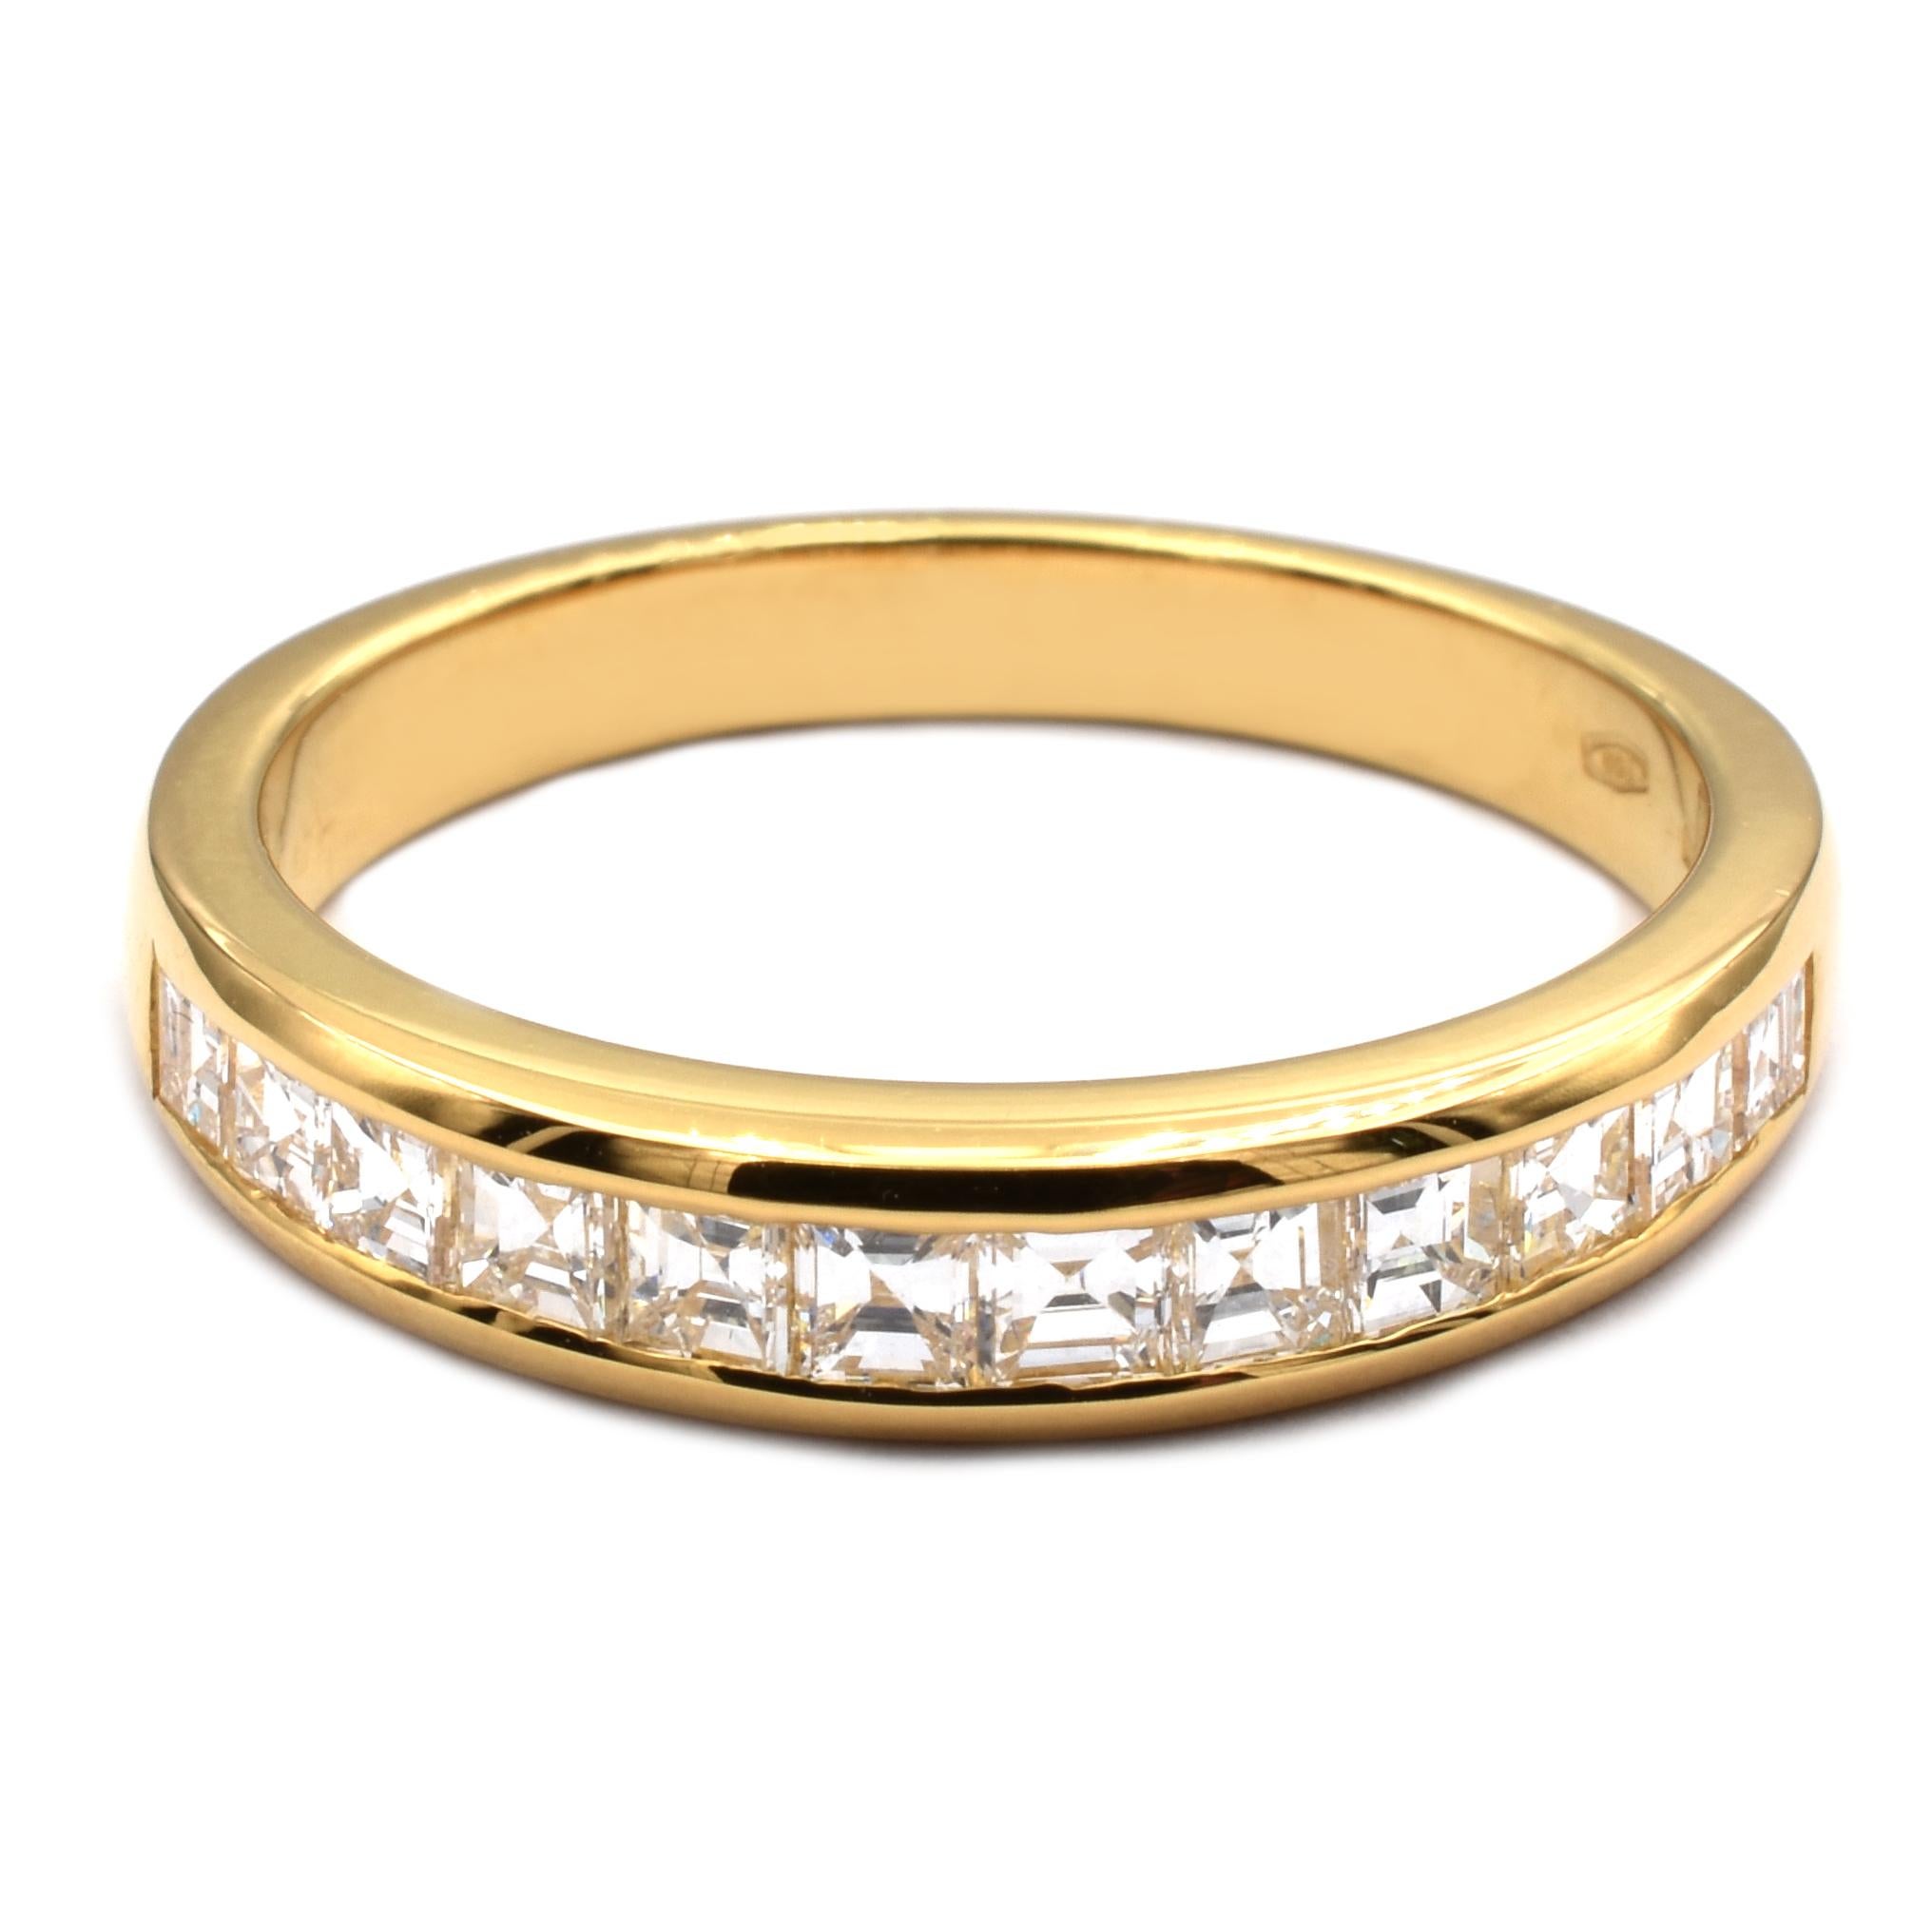 Contemporary Gilberto Cassola Square Cut Diamonds Yellow Gold Ring Made in Italy For Sale